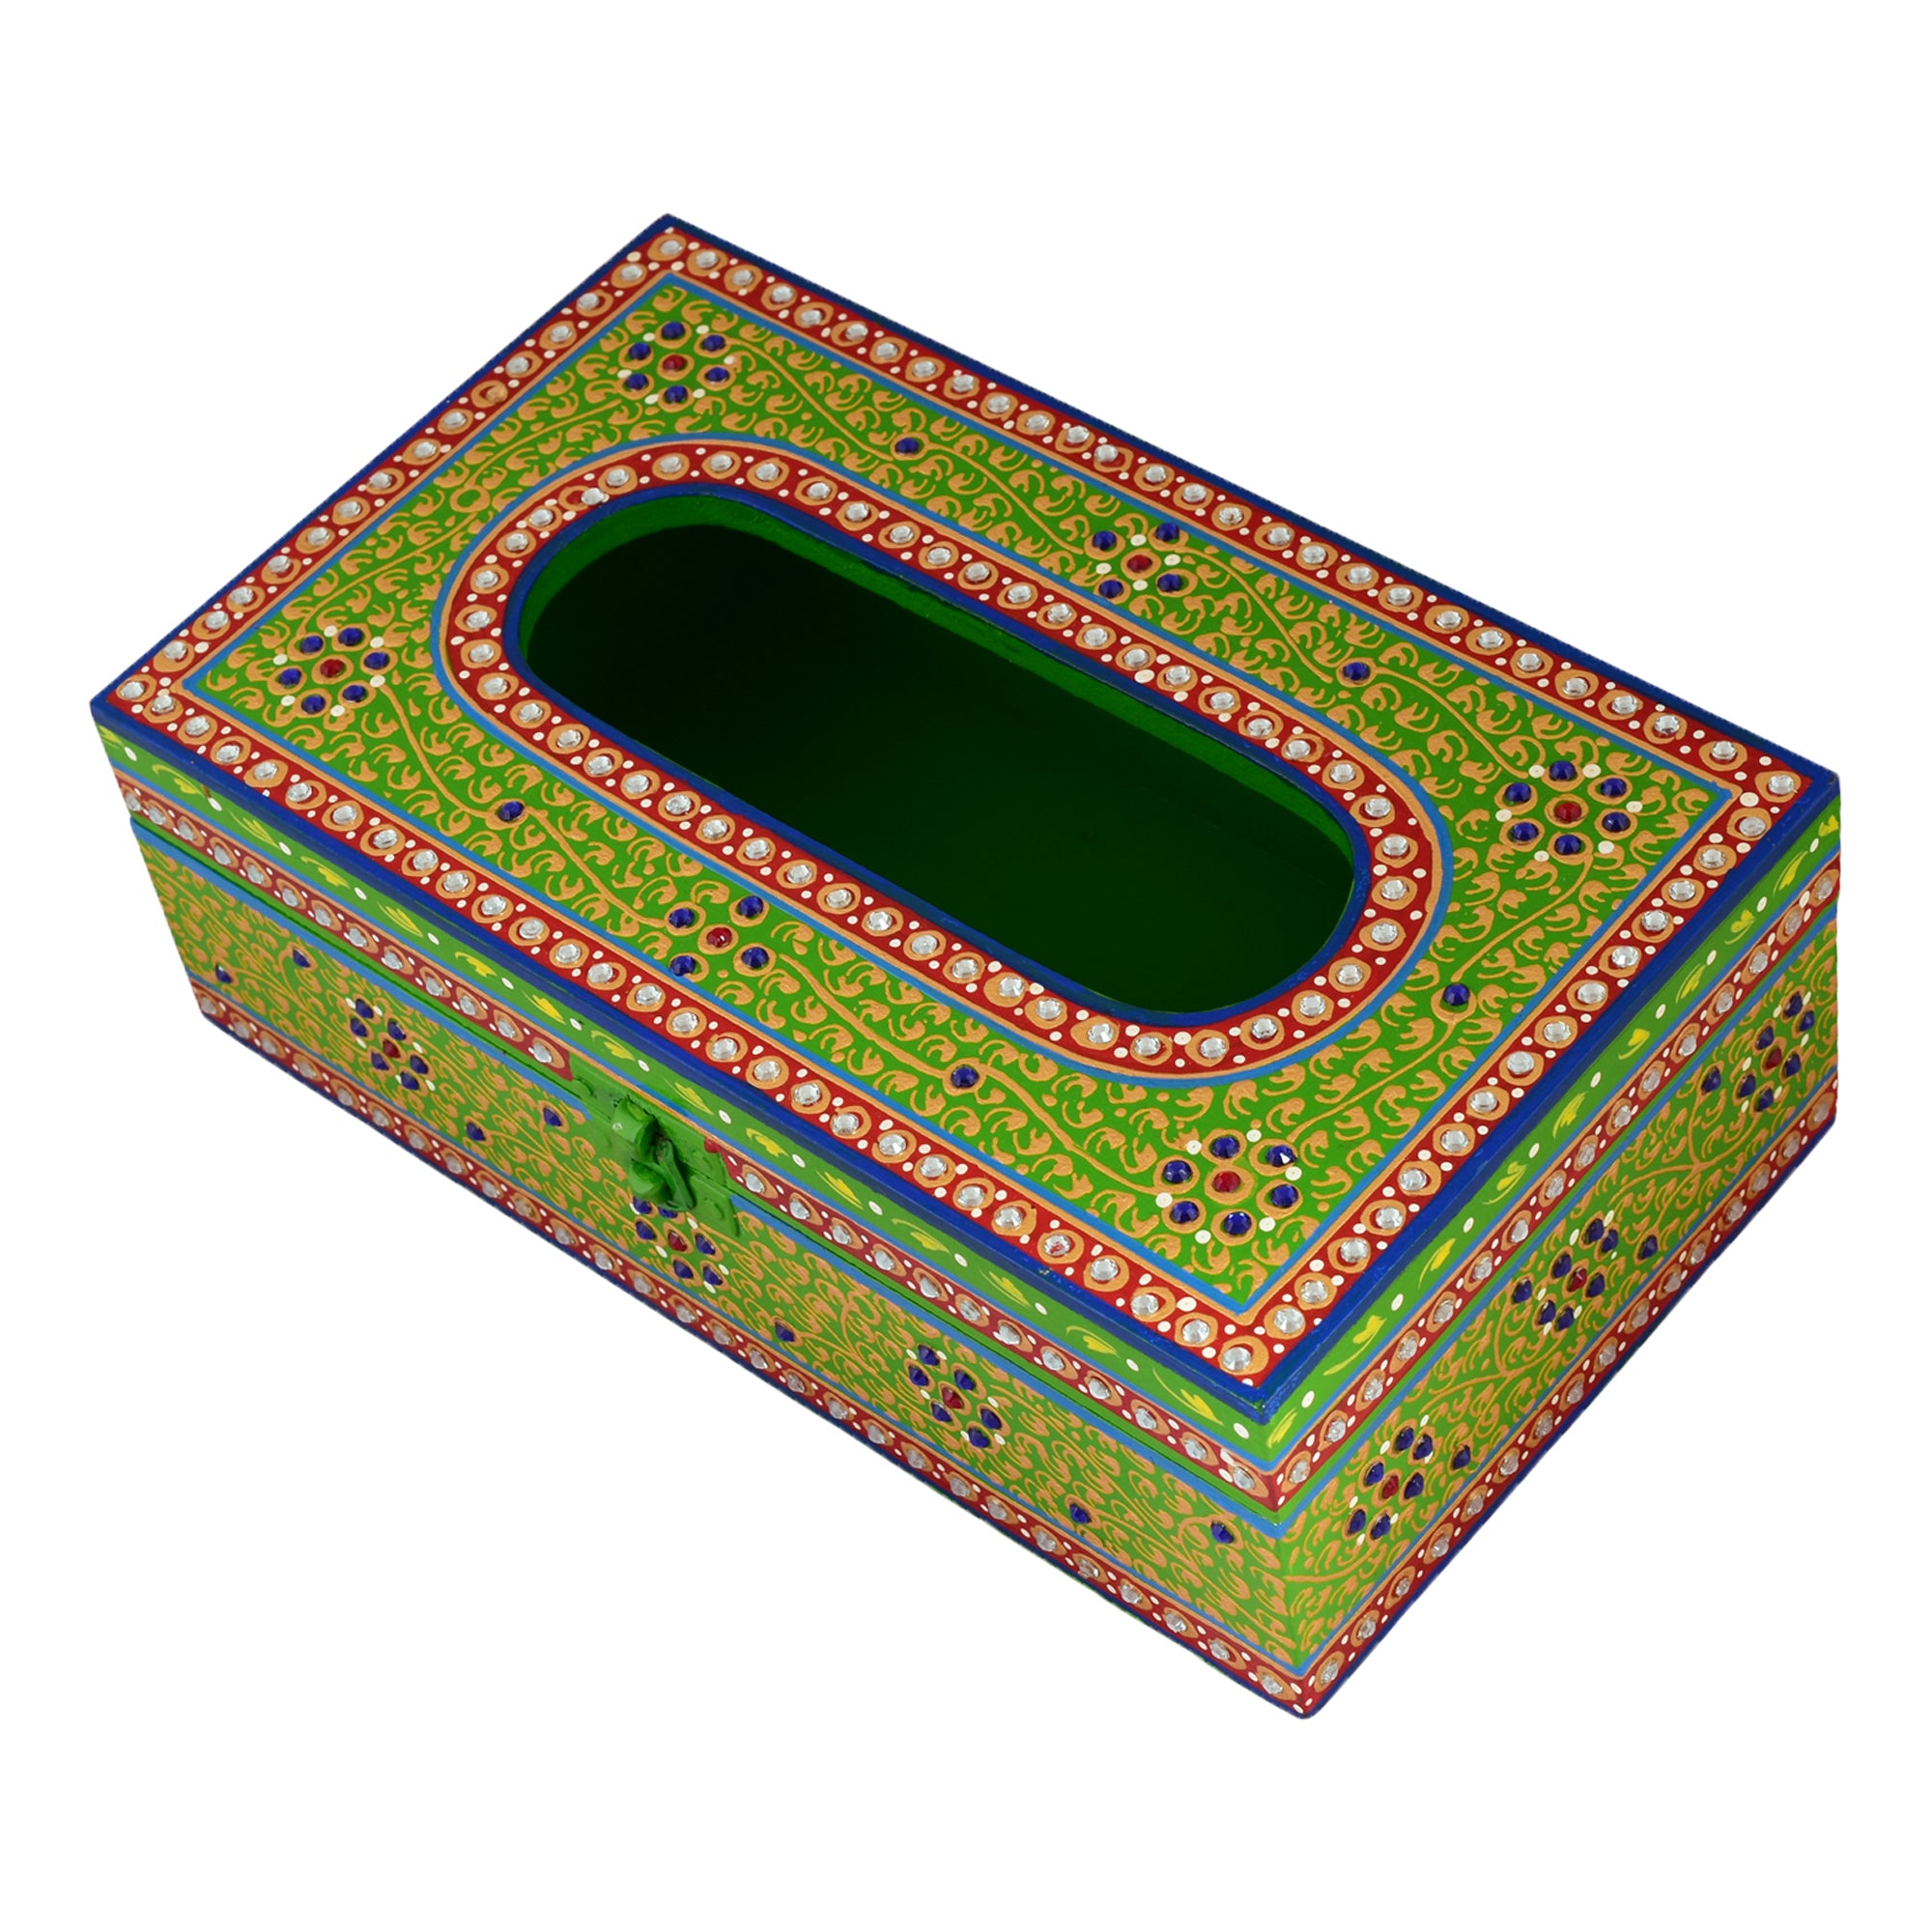  hand painted tissue box 